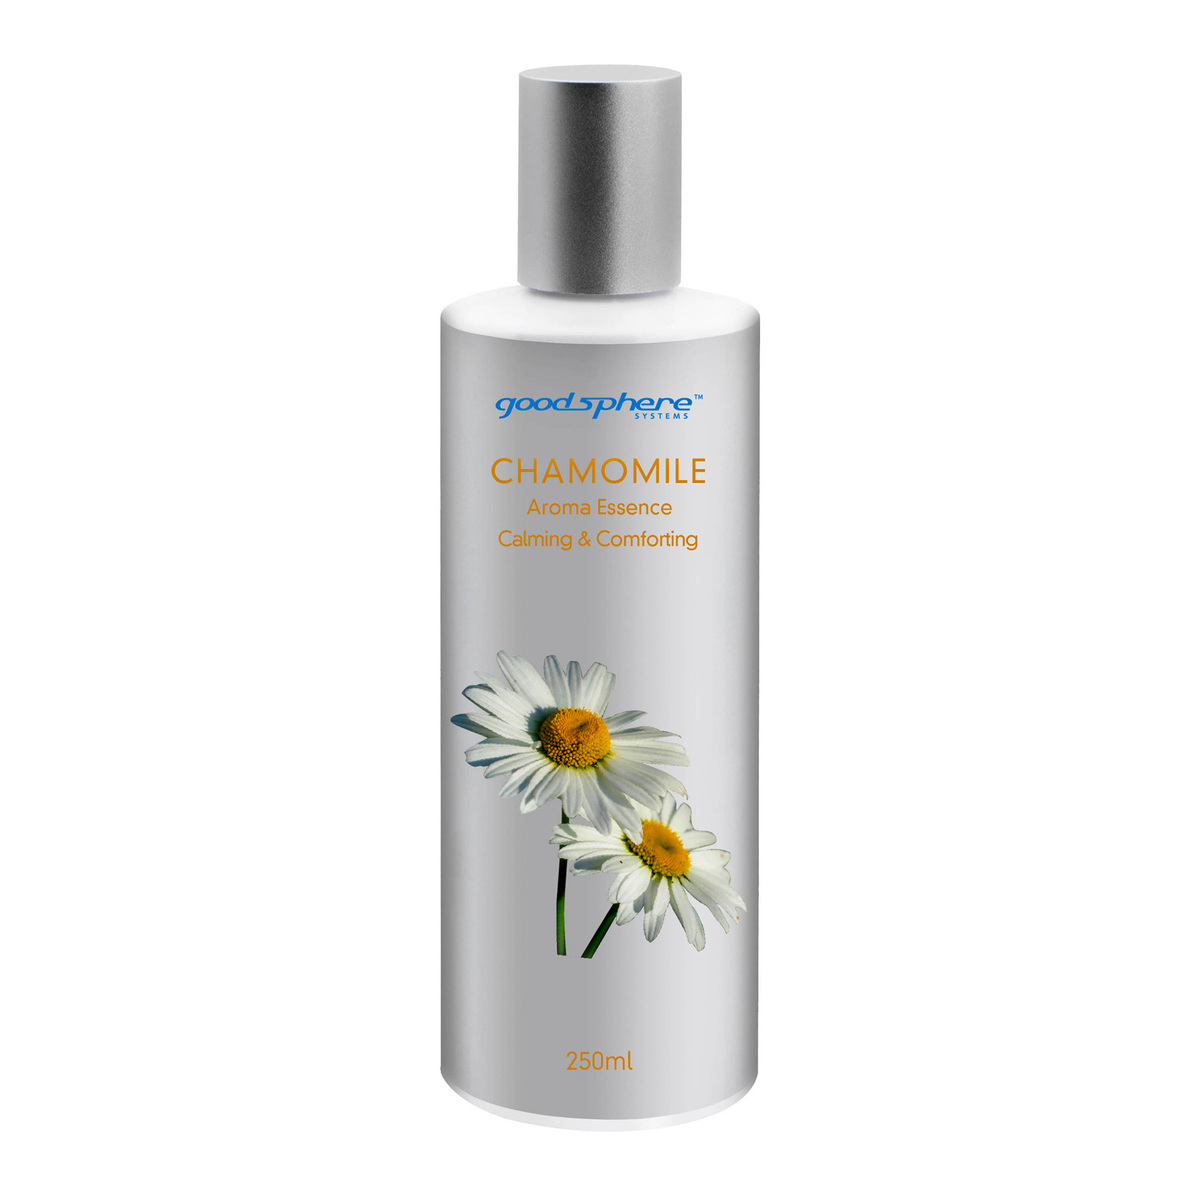 Goodsphere Aroma Essence The Classic Collection, Chamomile, 250ml, GS-250ML-CM